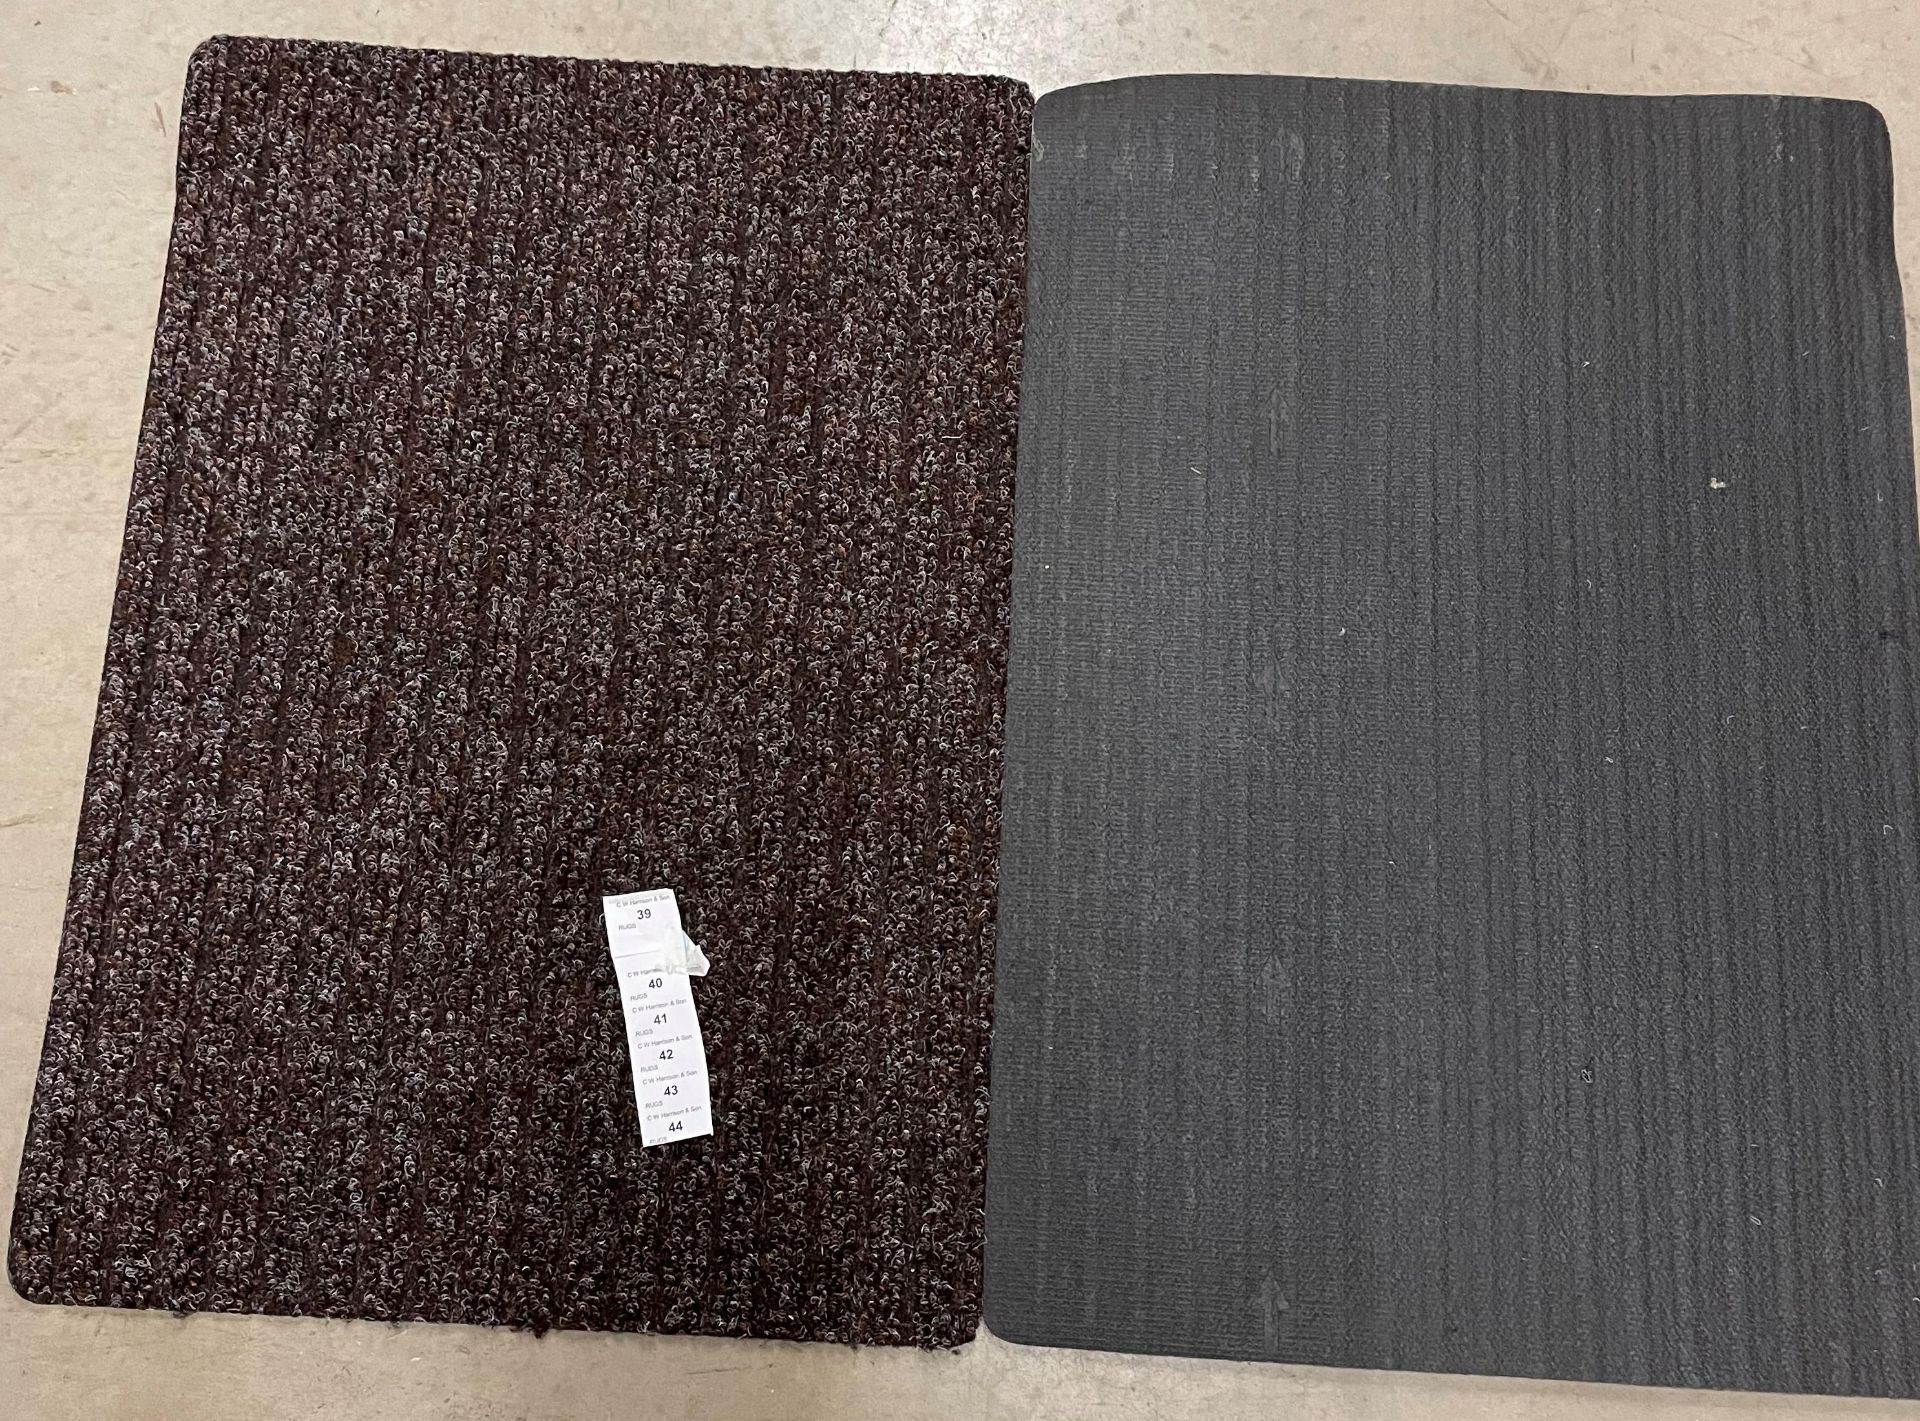 20 x brown rubber backed mats - 55 x 80cm